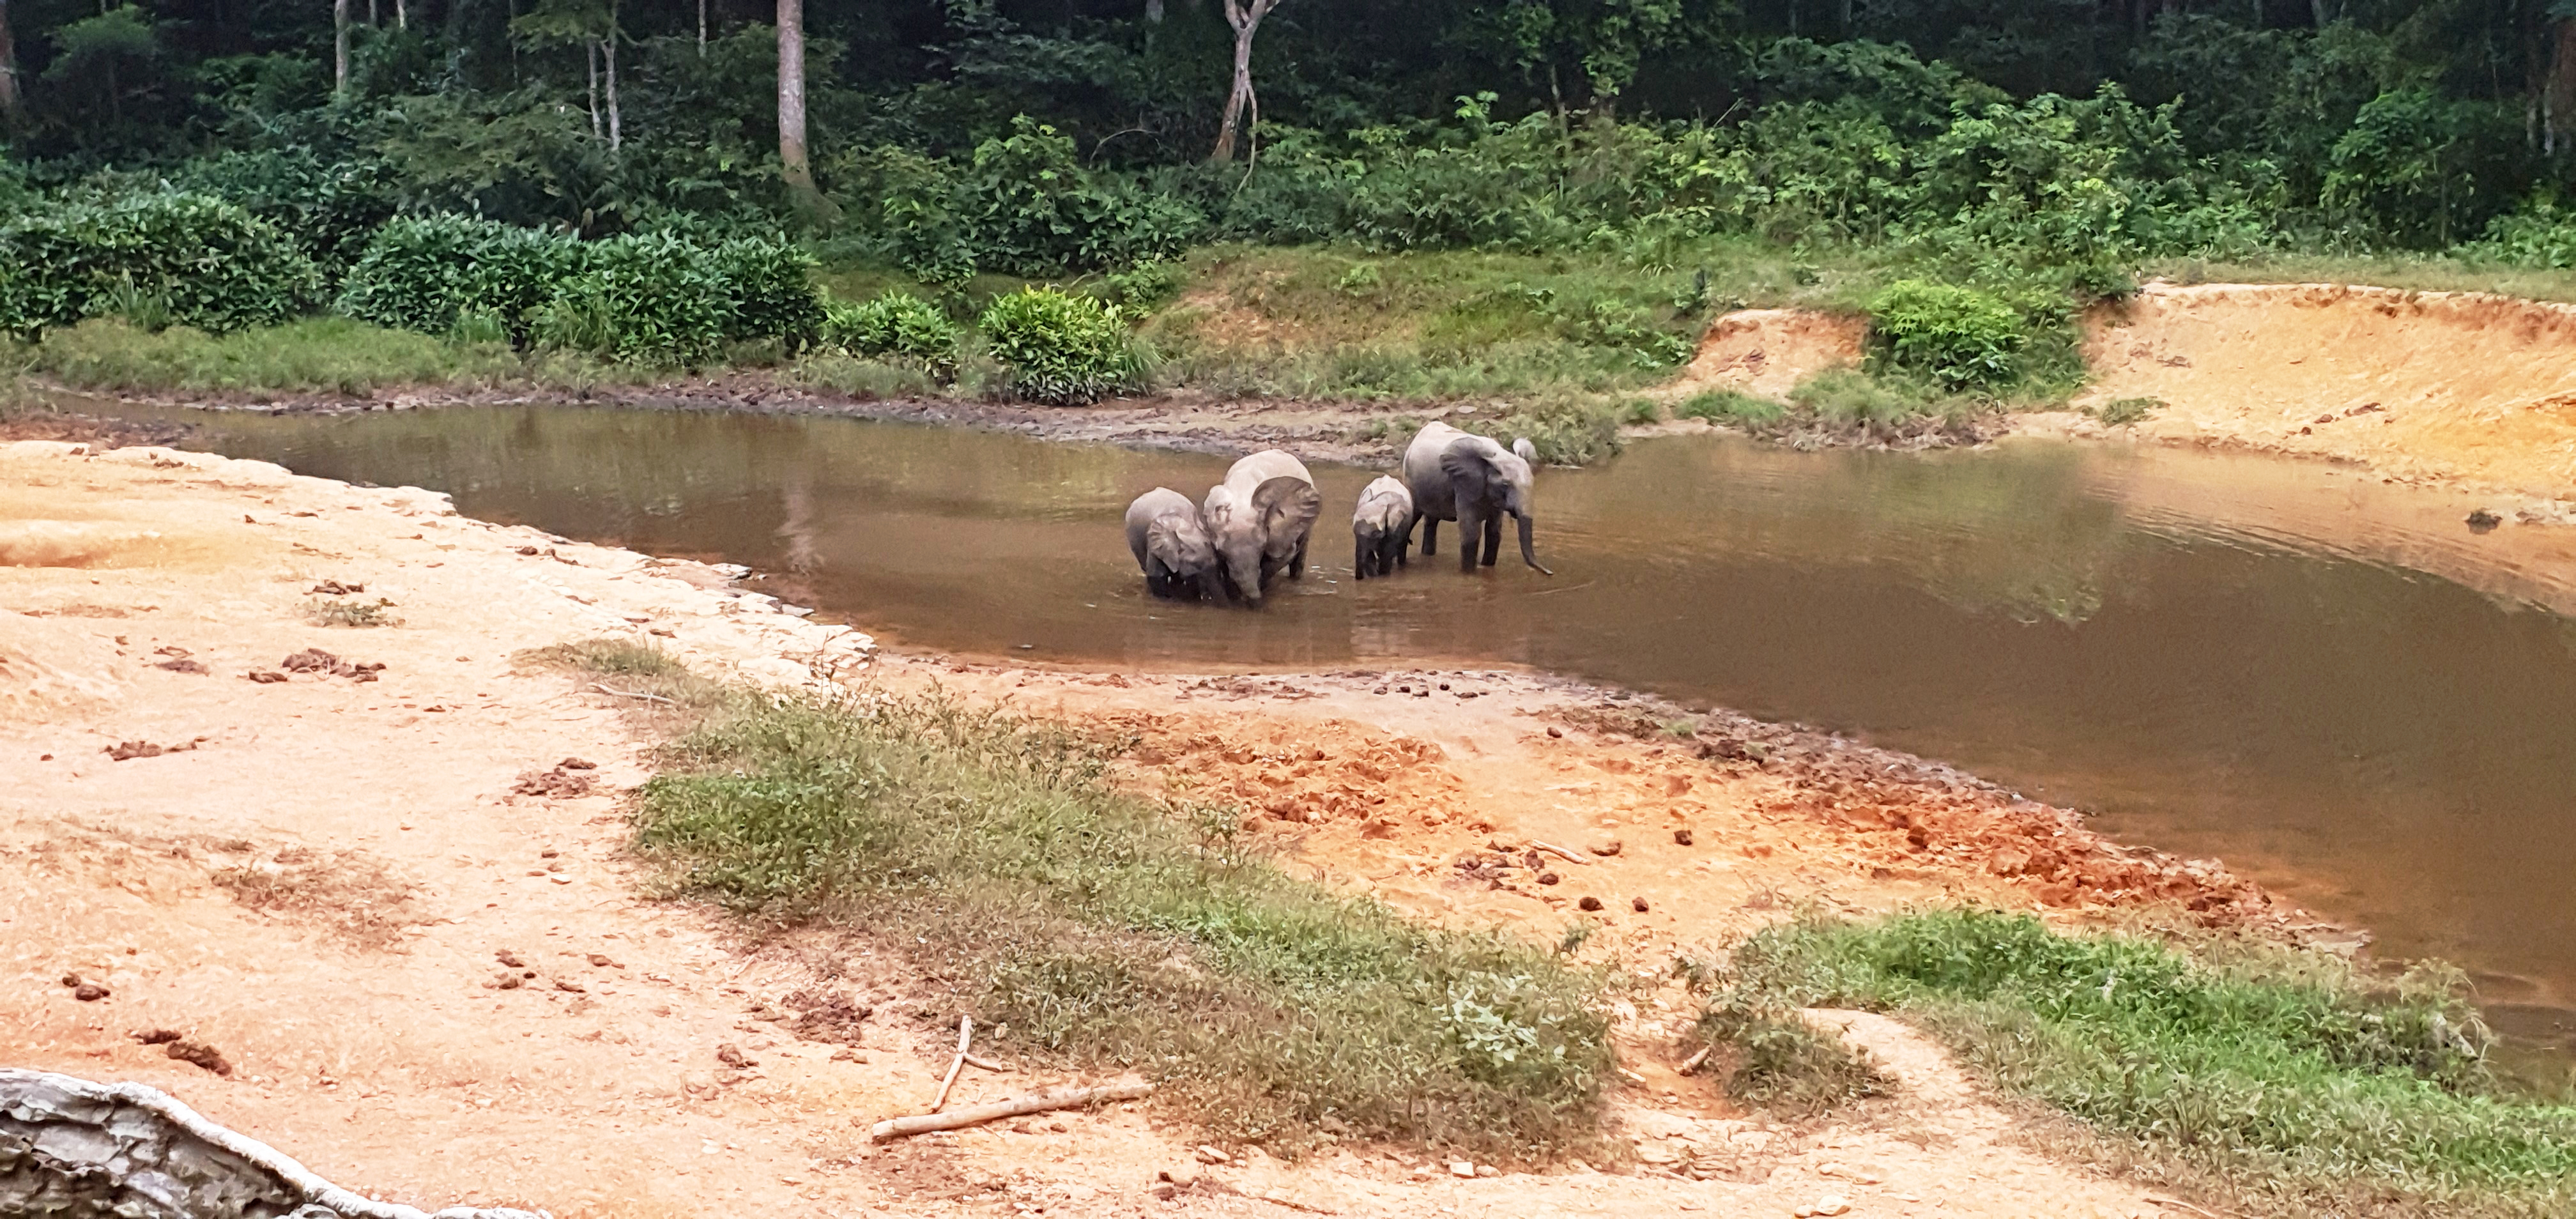 small group of elephants stand in river surrounded by forest in Gabon